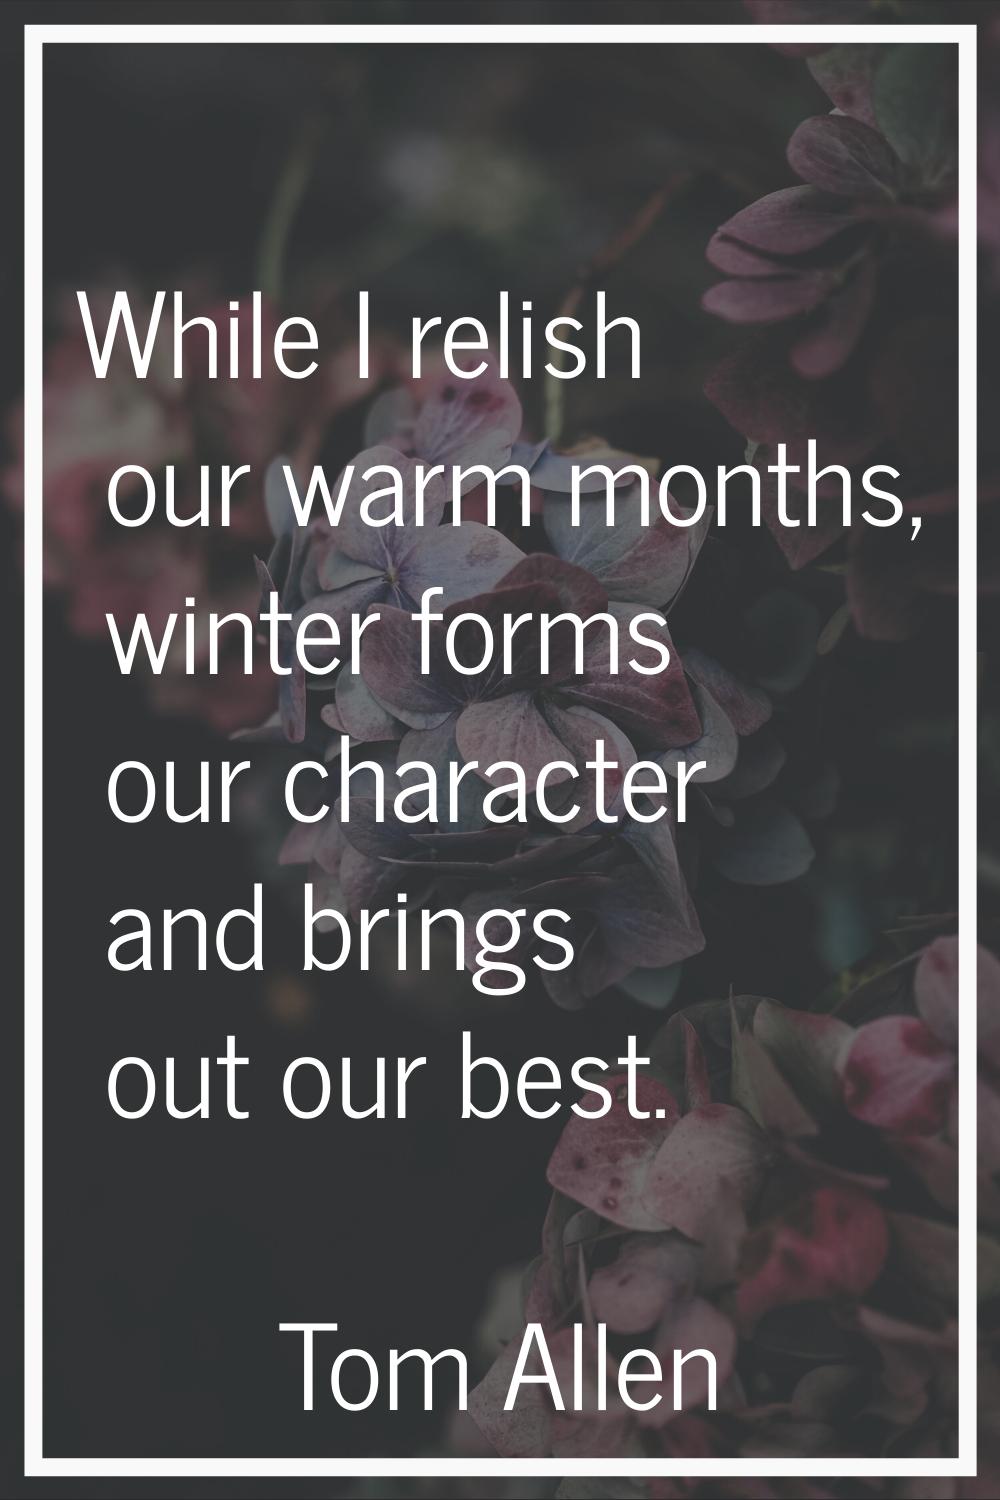 While I relish our warm months, winter forms our character and brings out our best.